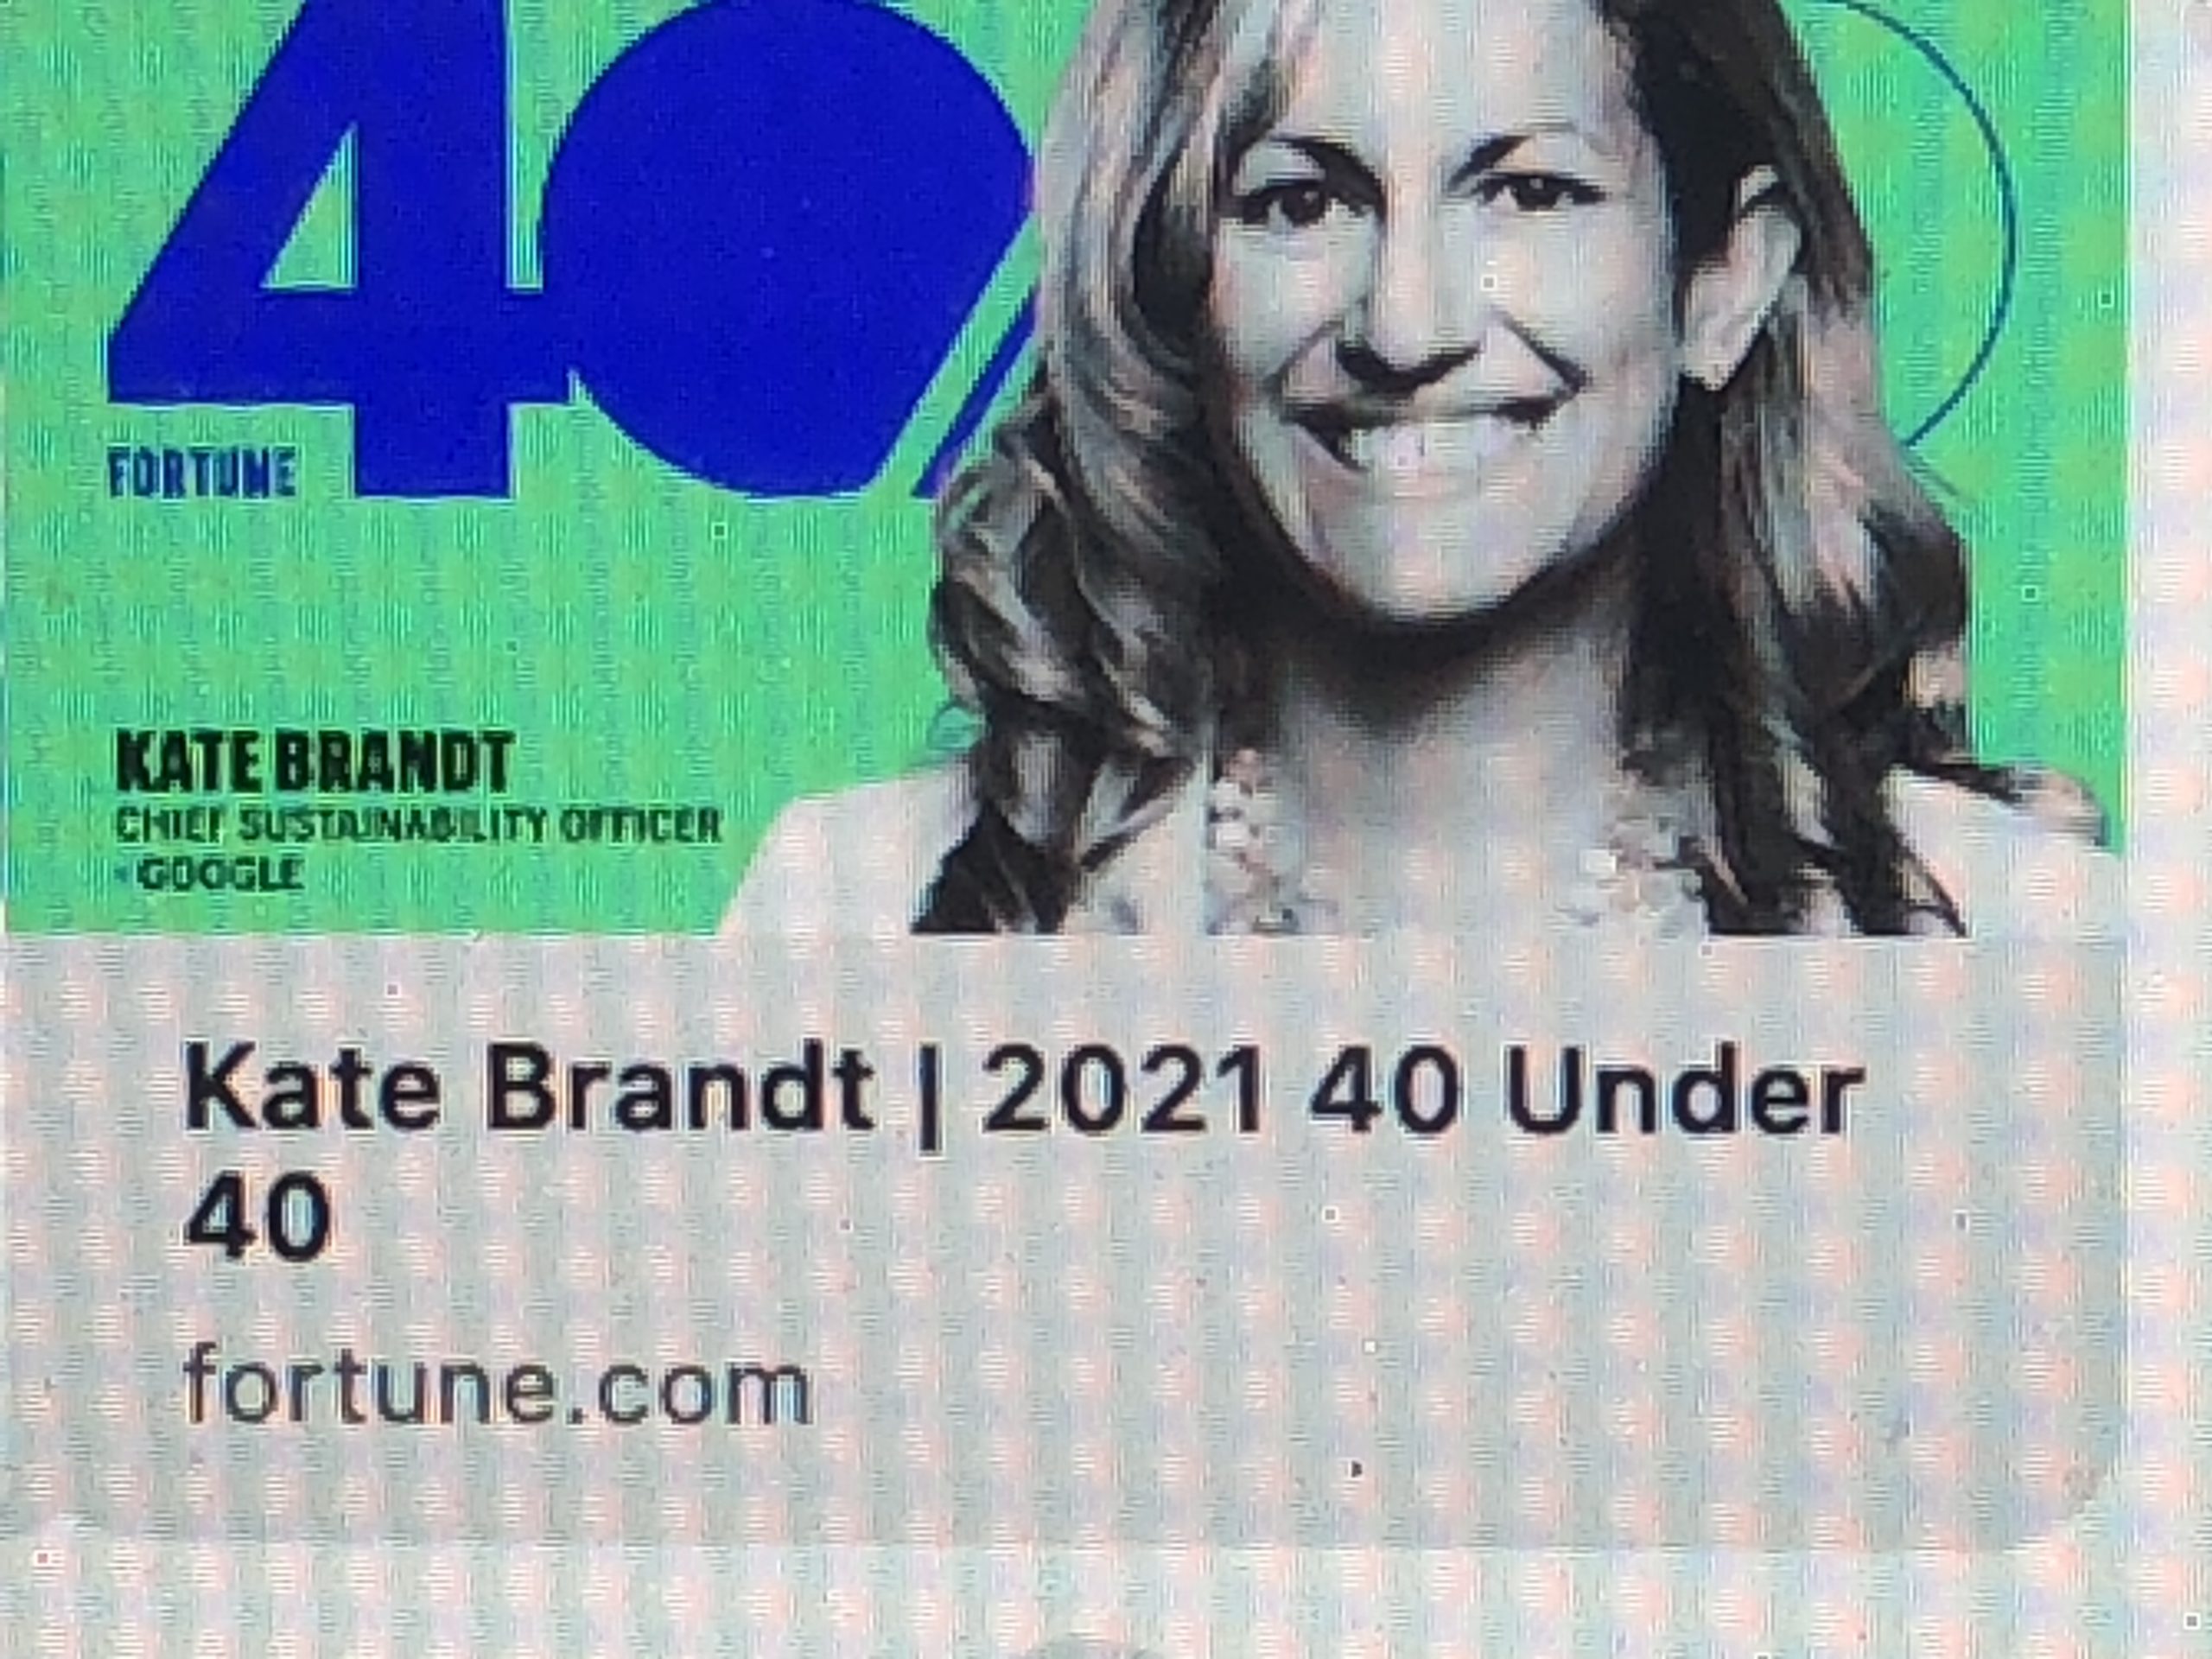 Scholar named one of Fortune magazine’s 40 under 40